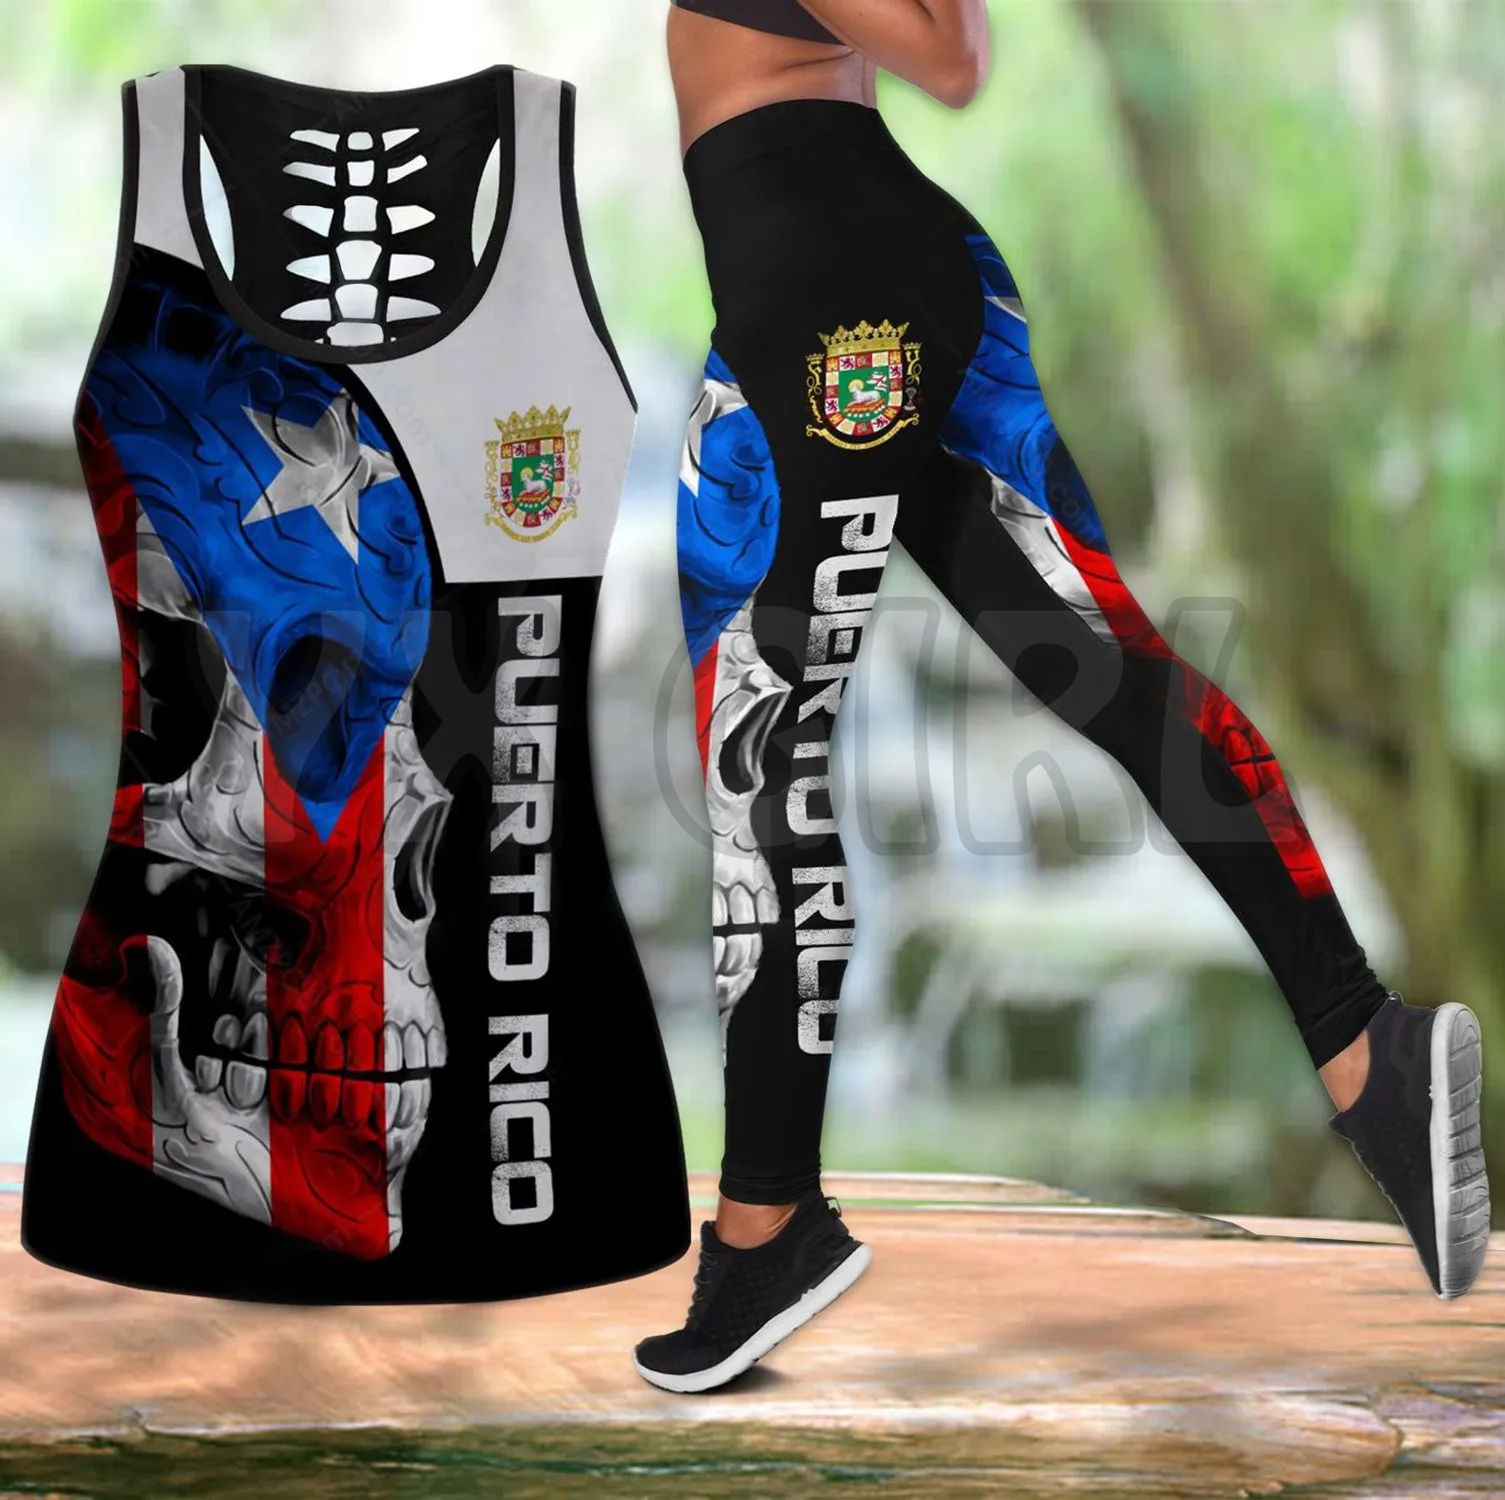 Puerto Rico With Skull 3D Printed Tank Top+Legging Combo Outfit Yoga Fitness Legging Women puerto rico maga flower lover 3d all over printed tank top legging combo outfit yoga fitness legging women